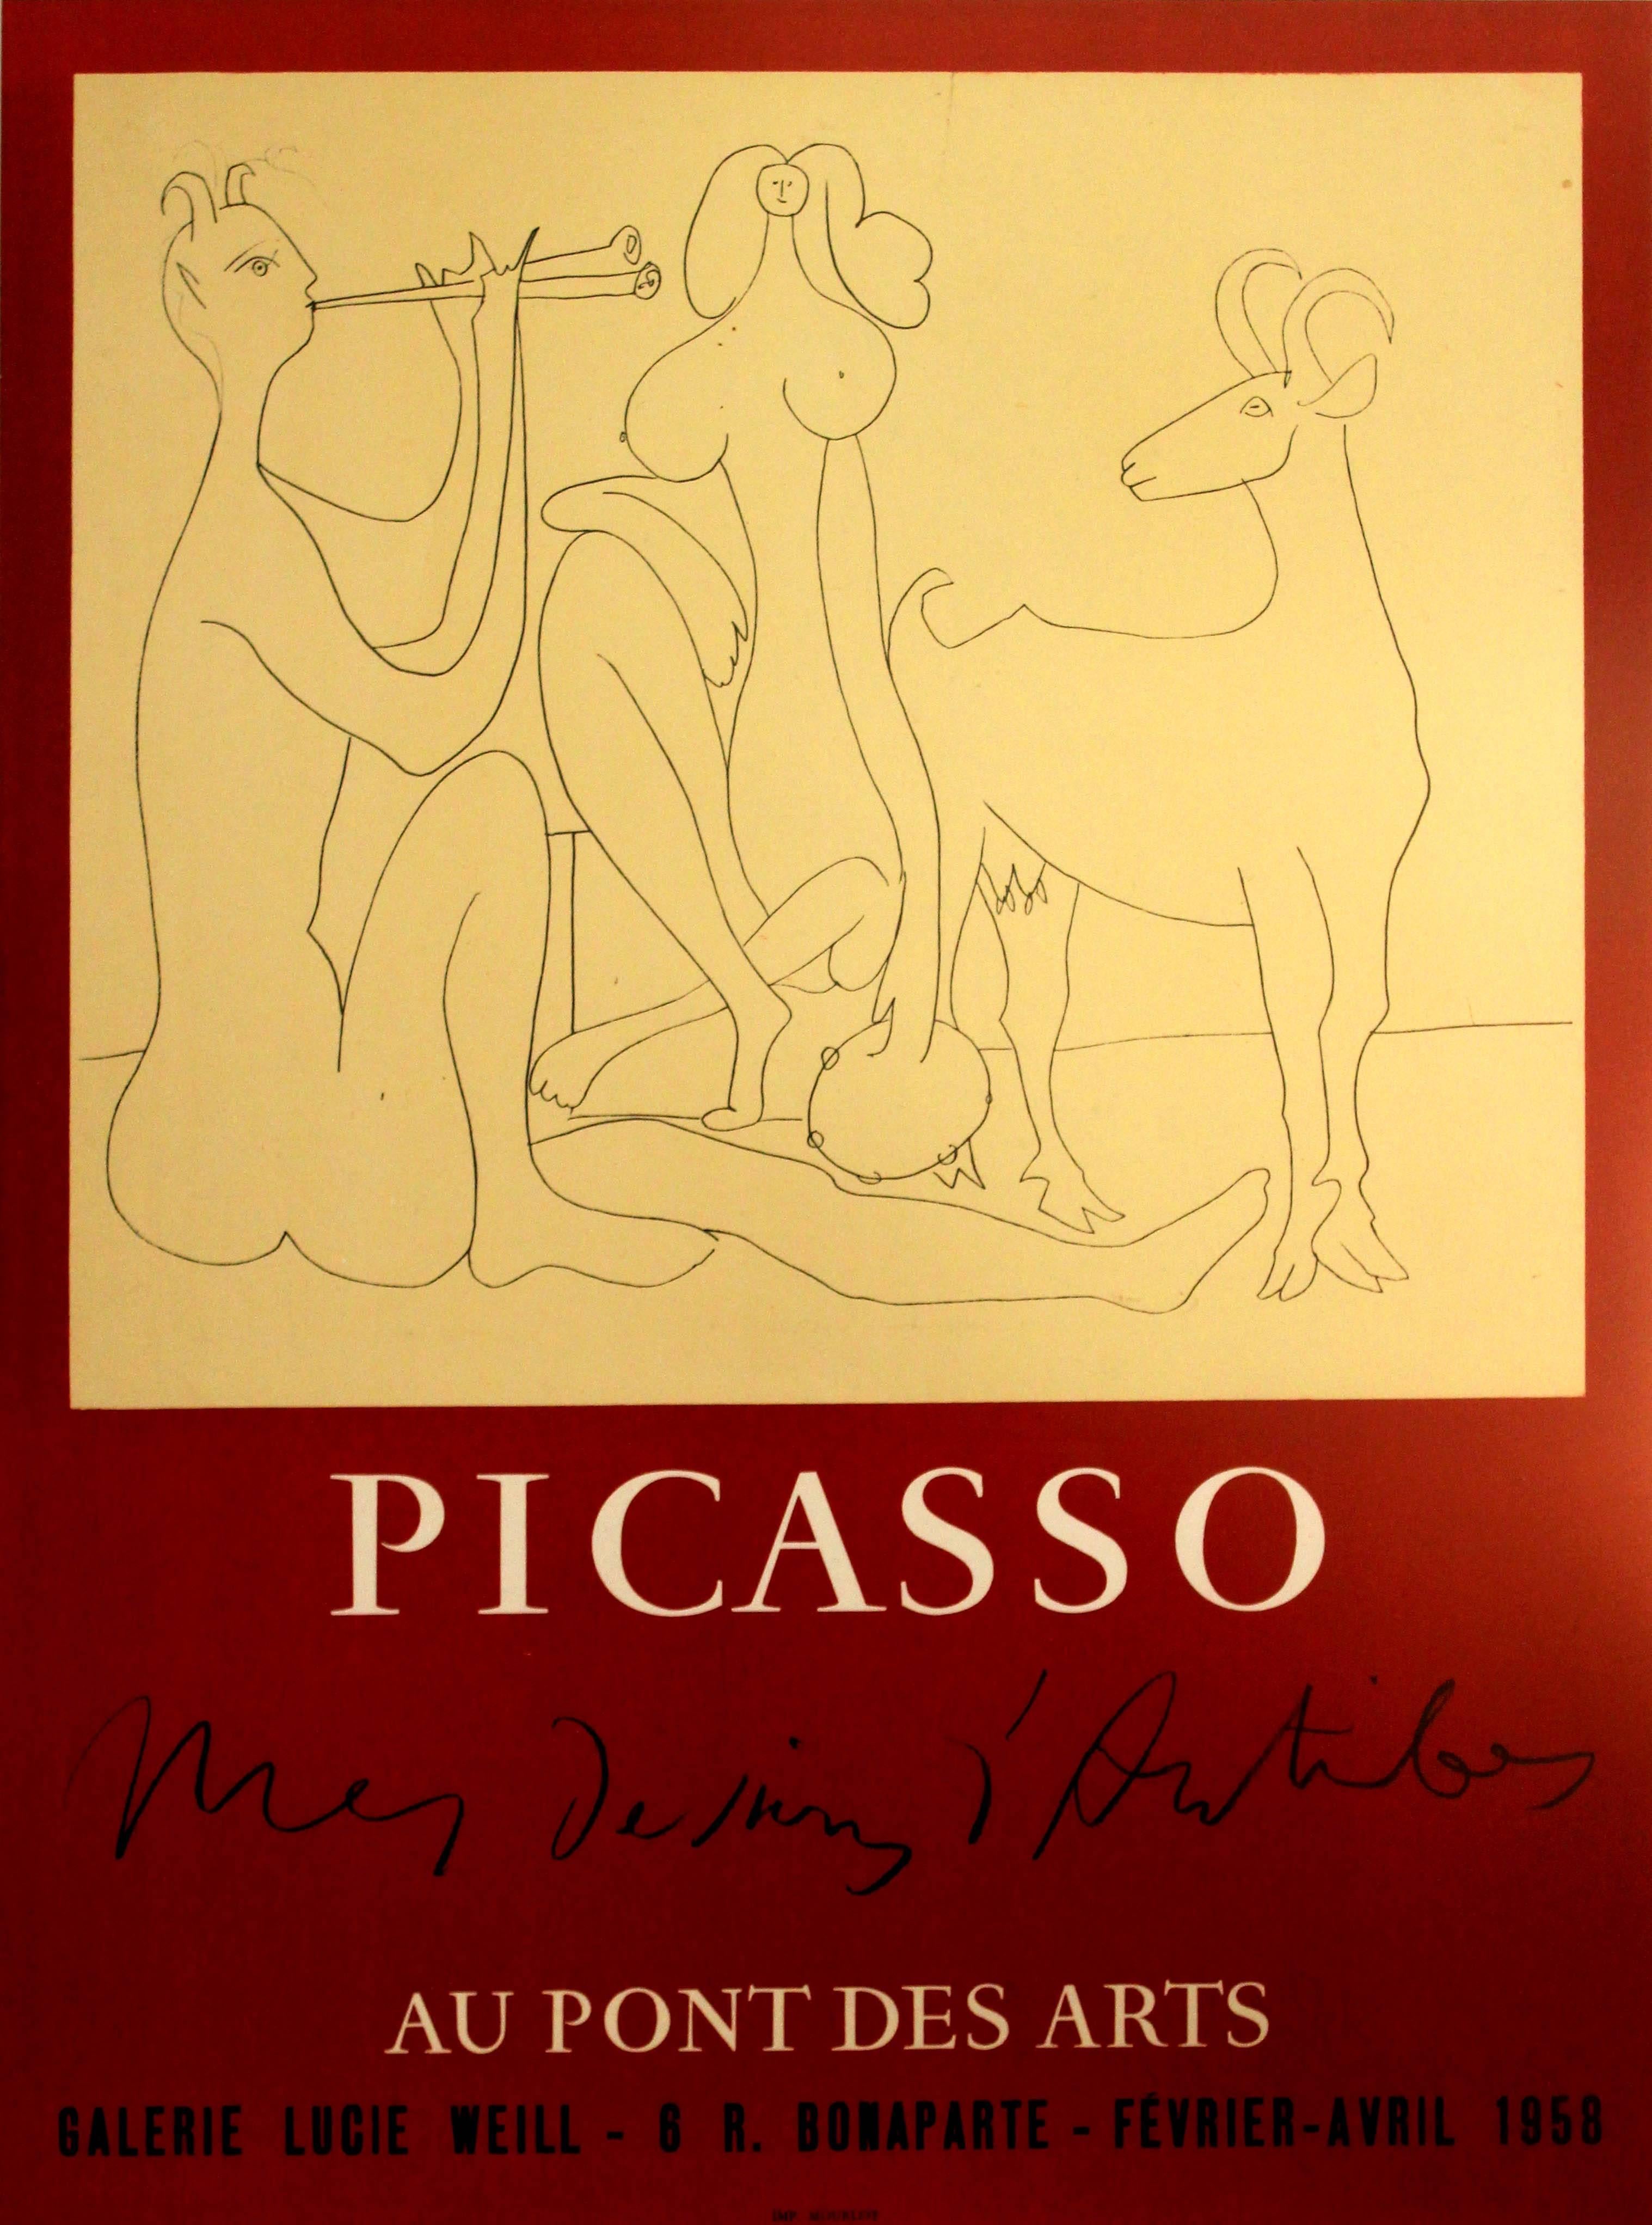 Pablo Picasso Print - Original 1958 Picasso Exhibition Poster For Mes Dessins d'Antibes - Lucie Weill